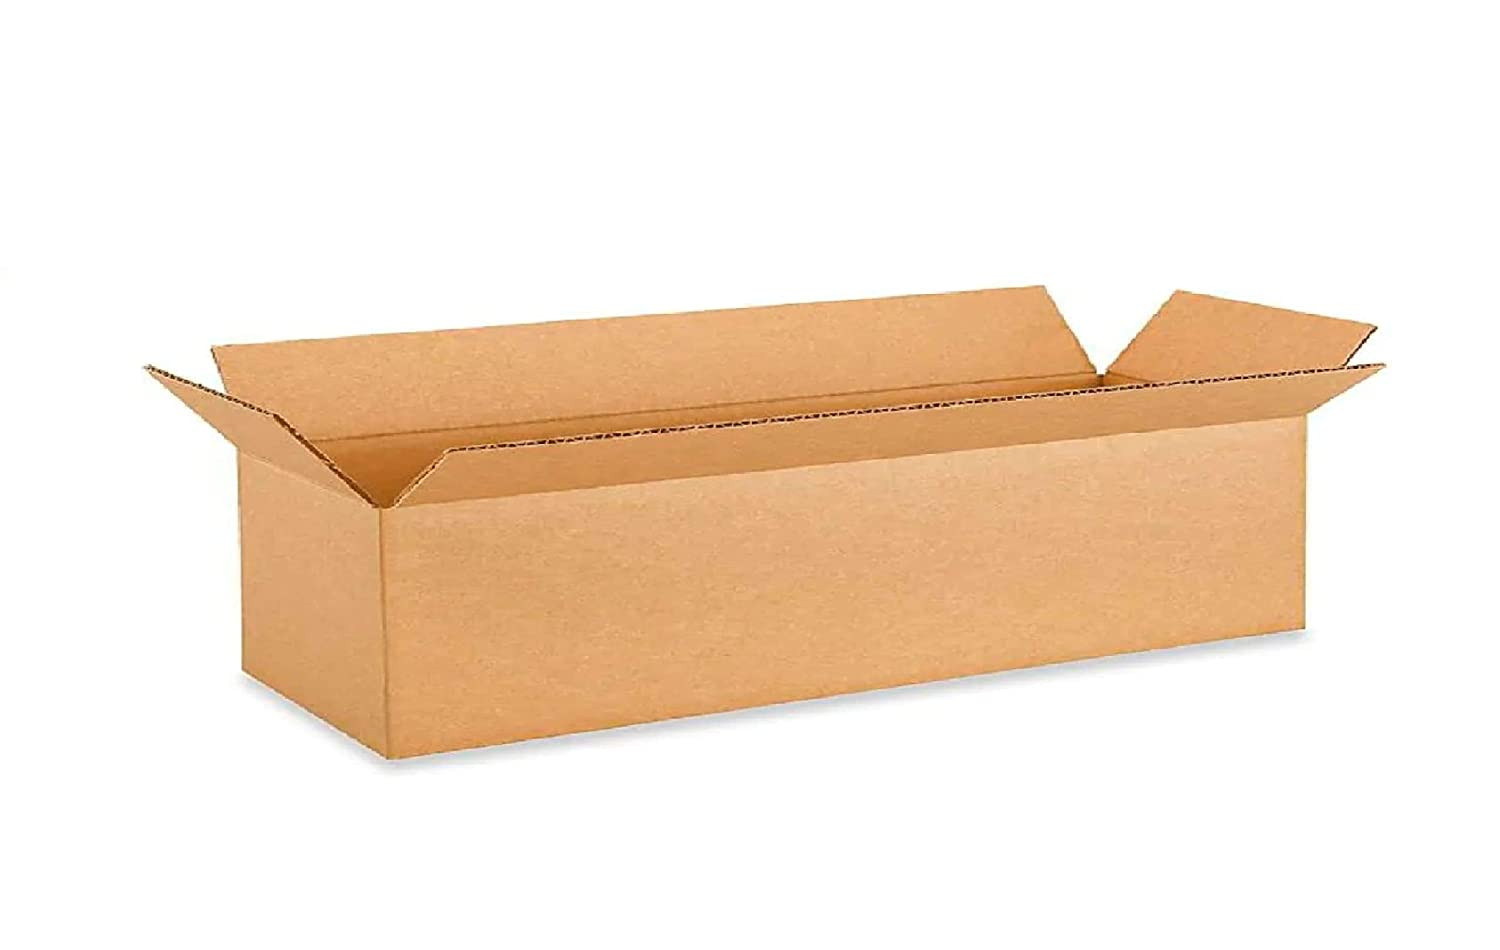 TOTALPACK® 2 x 2 x 3 - White Corrugated Strap Guards Carton Corner  Protectors 1000 Units - Tools & Accessories - Boxes, Corrugated -  Packaging materials - TOTALPACK Products